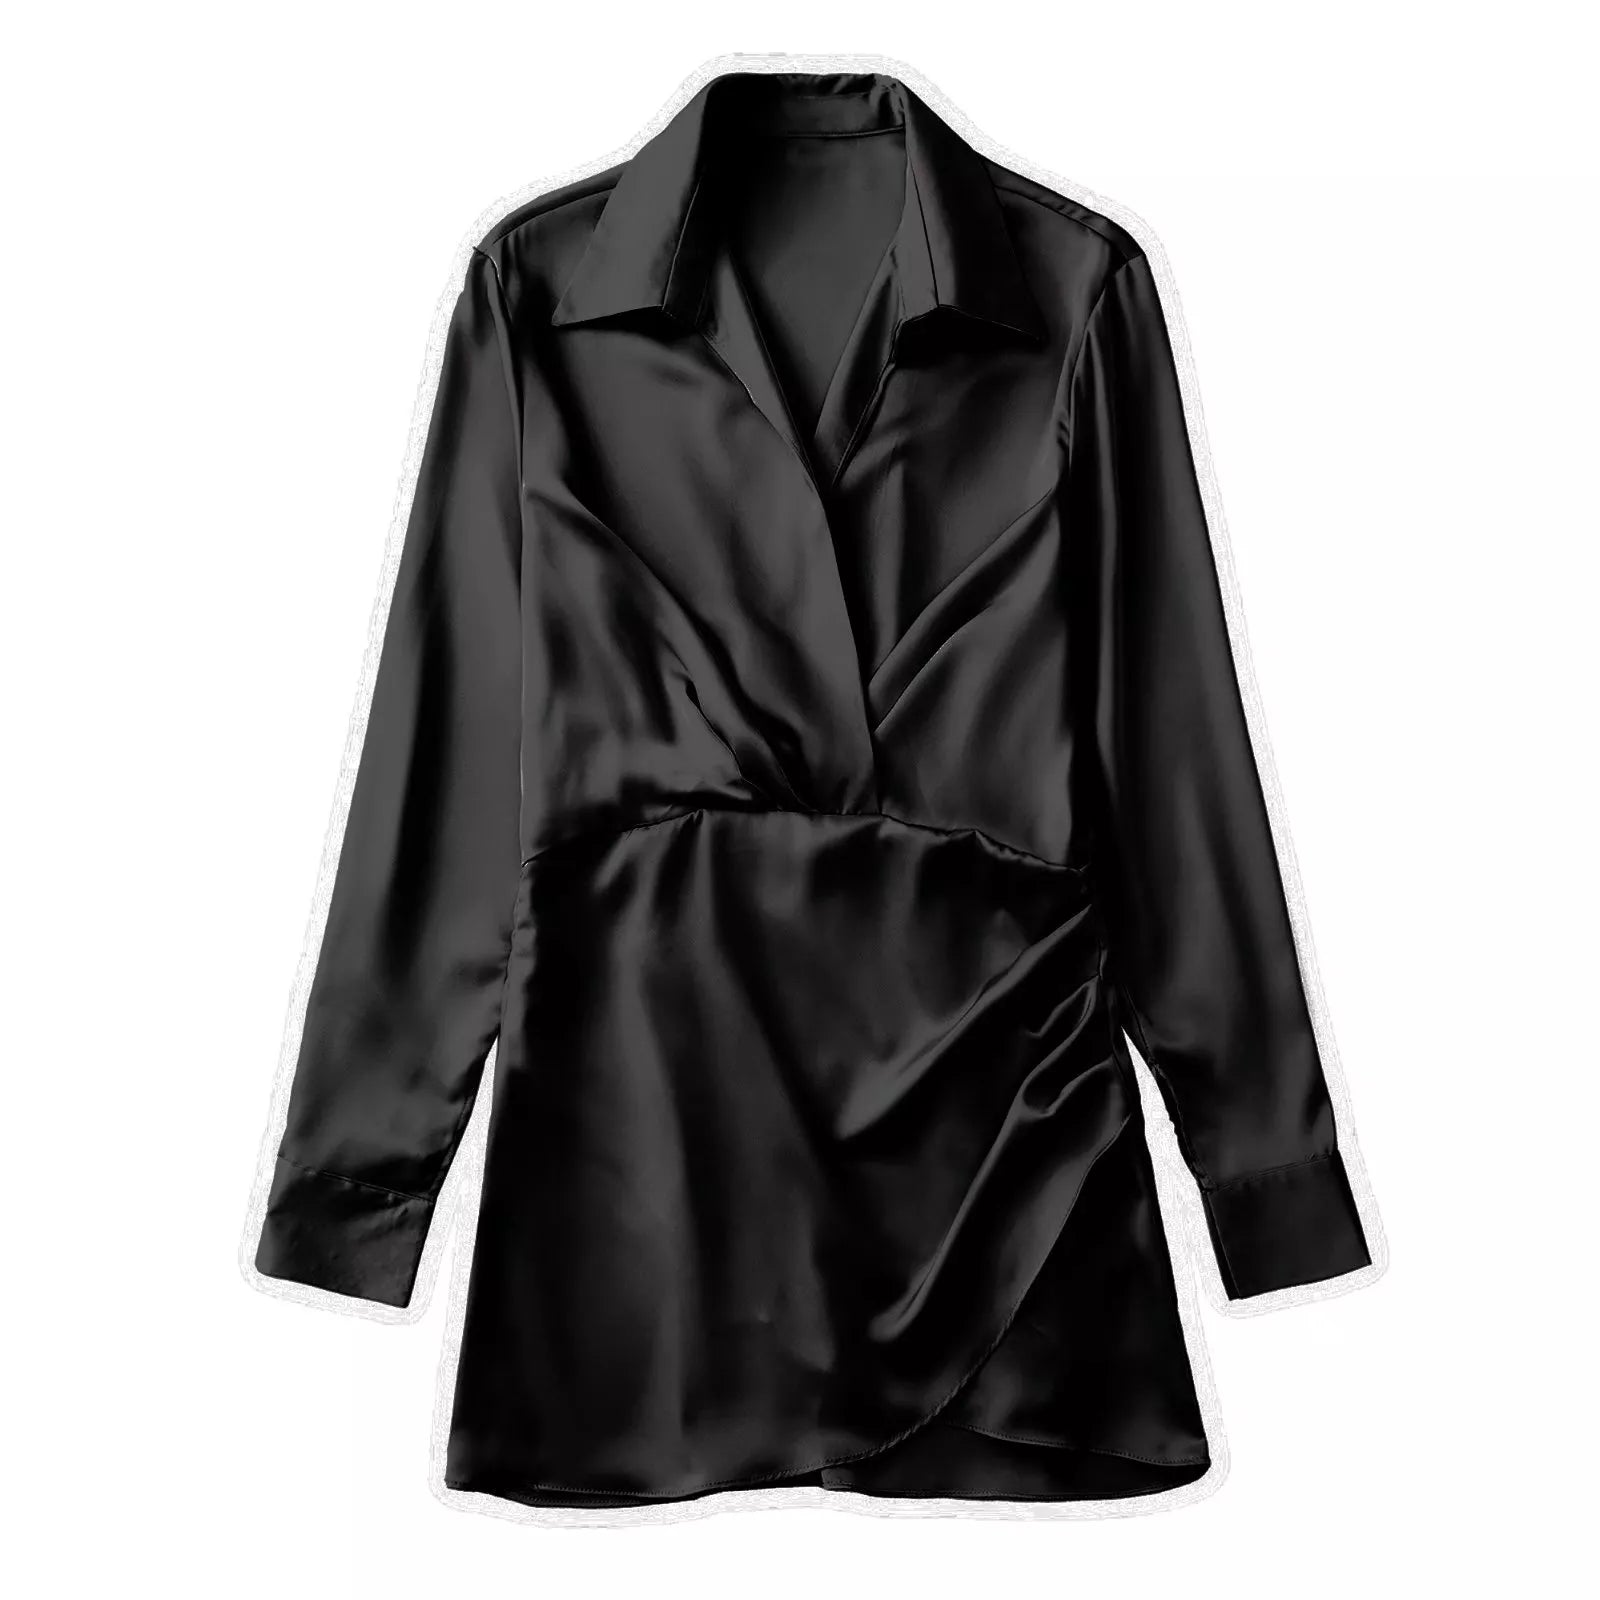 The Soft Satin Mini Shirt with Long Pleated Sleeves - Multiple Colors SA Formal Black 3XS China